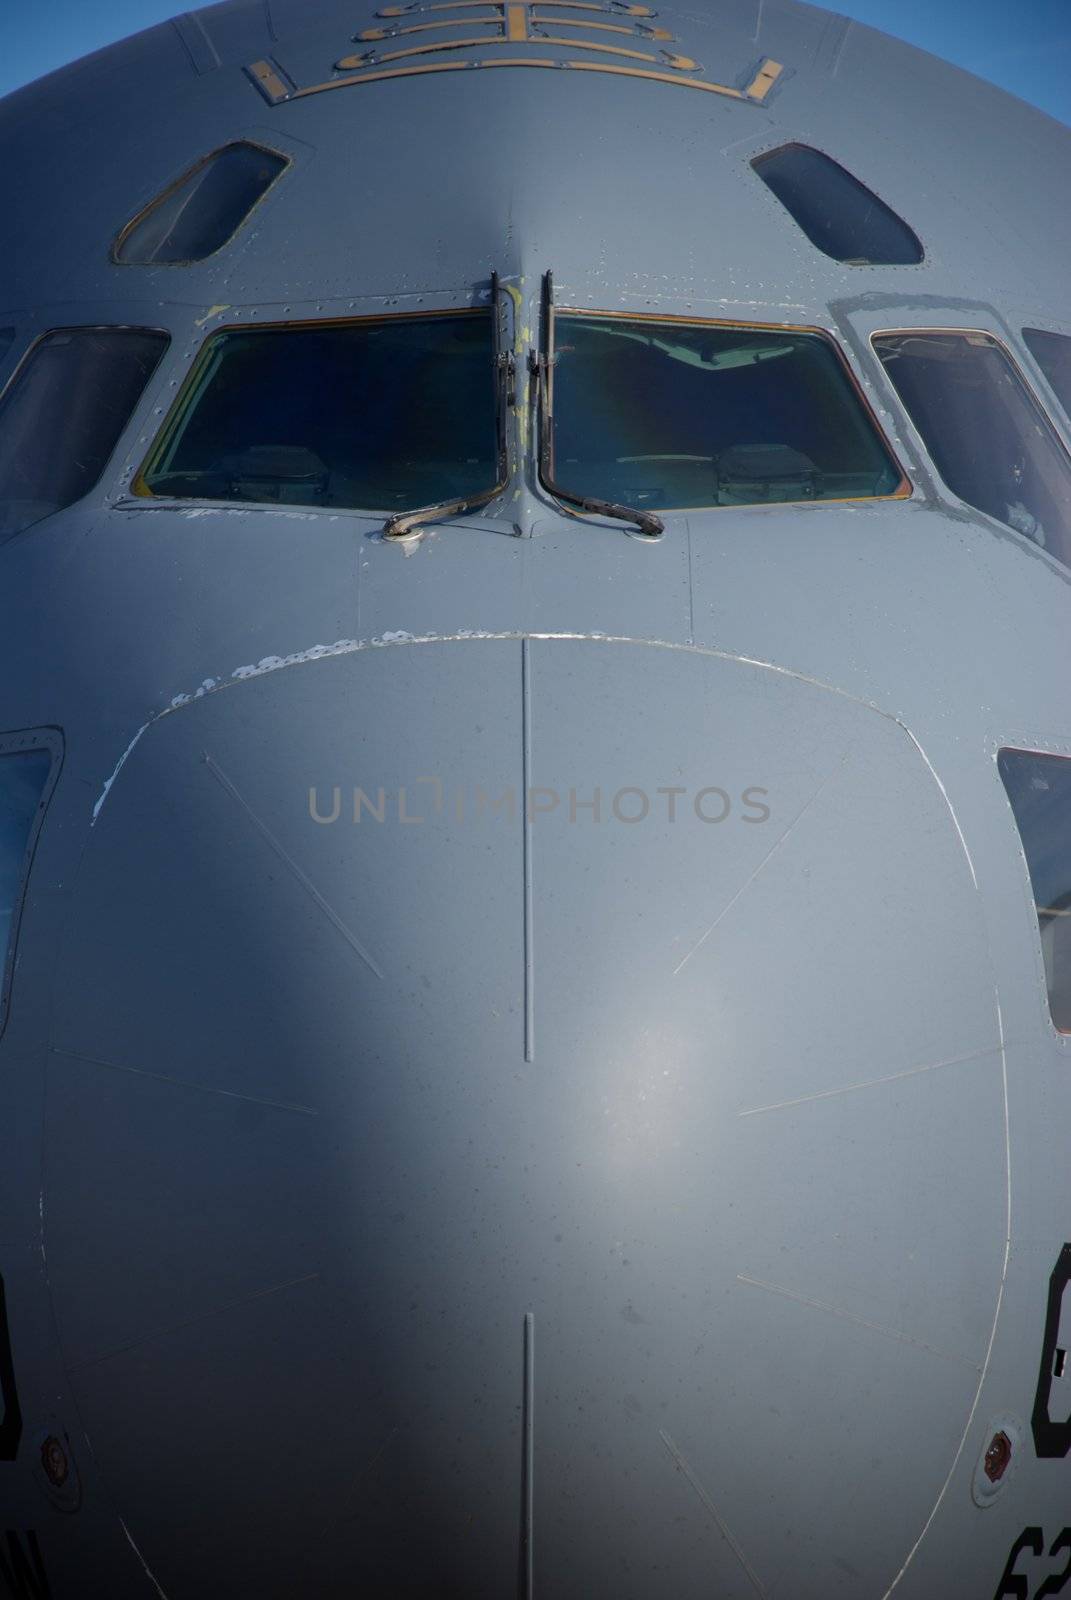 A close-up showing the nose of an Air Force cargo jet